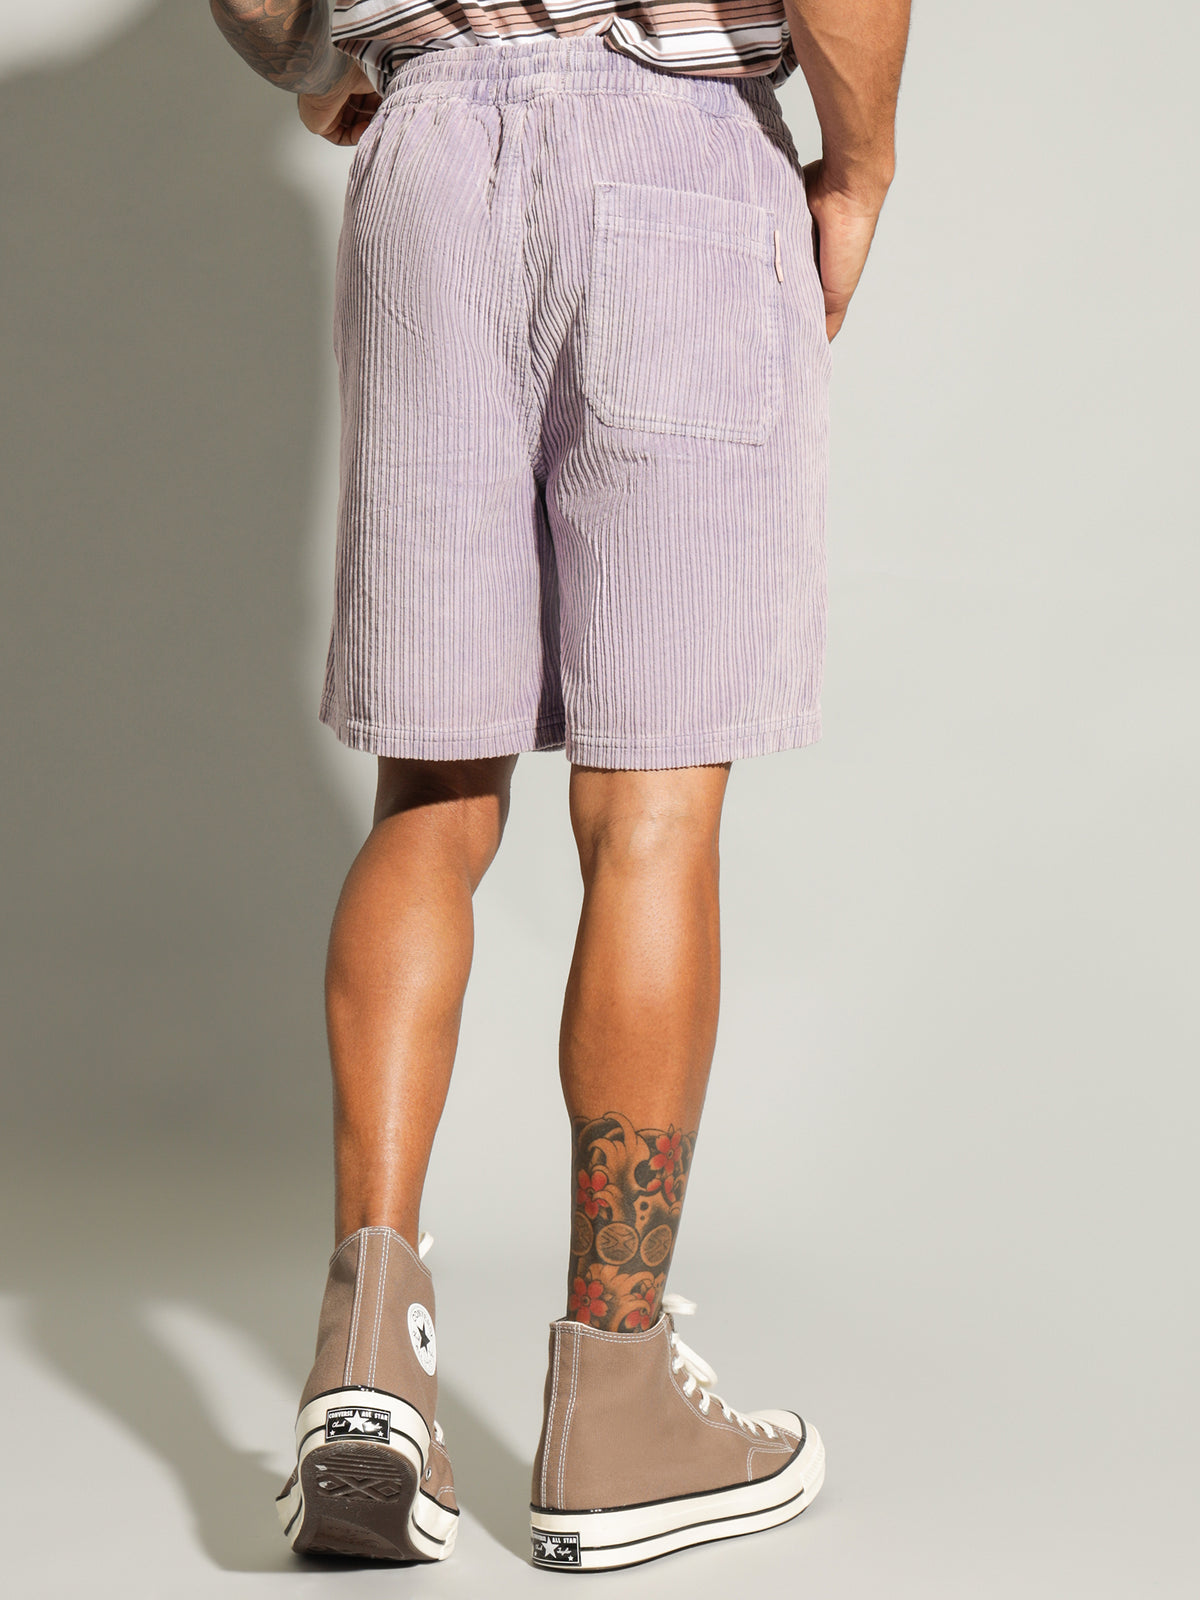 Manic Shorts in Violet